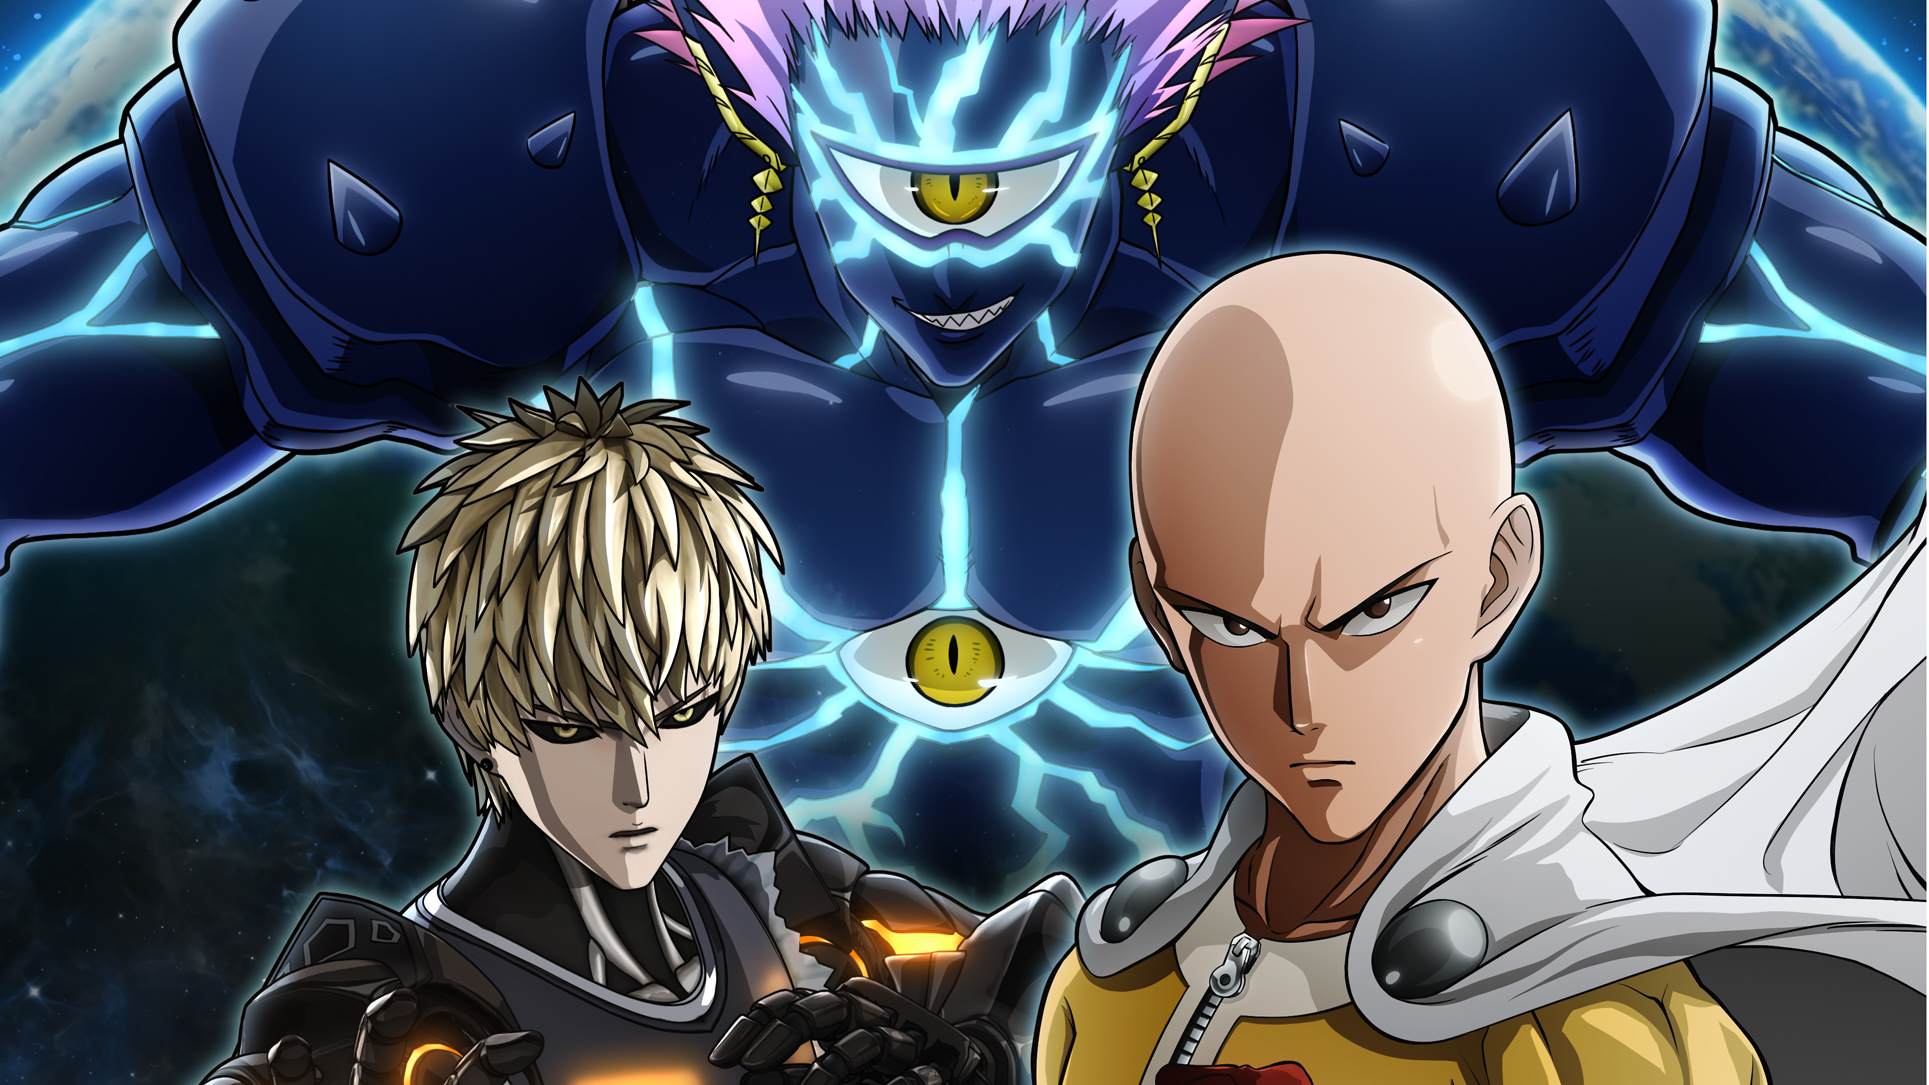 Some of the art for the upcoming One Punch Man: World game (PC & Mobile) :  r/OnePunchMan